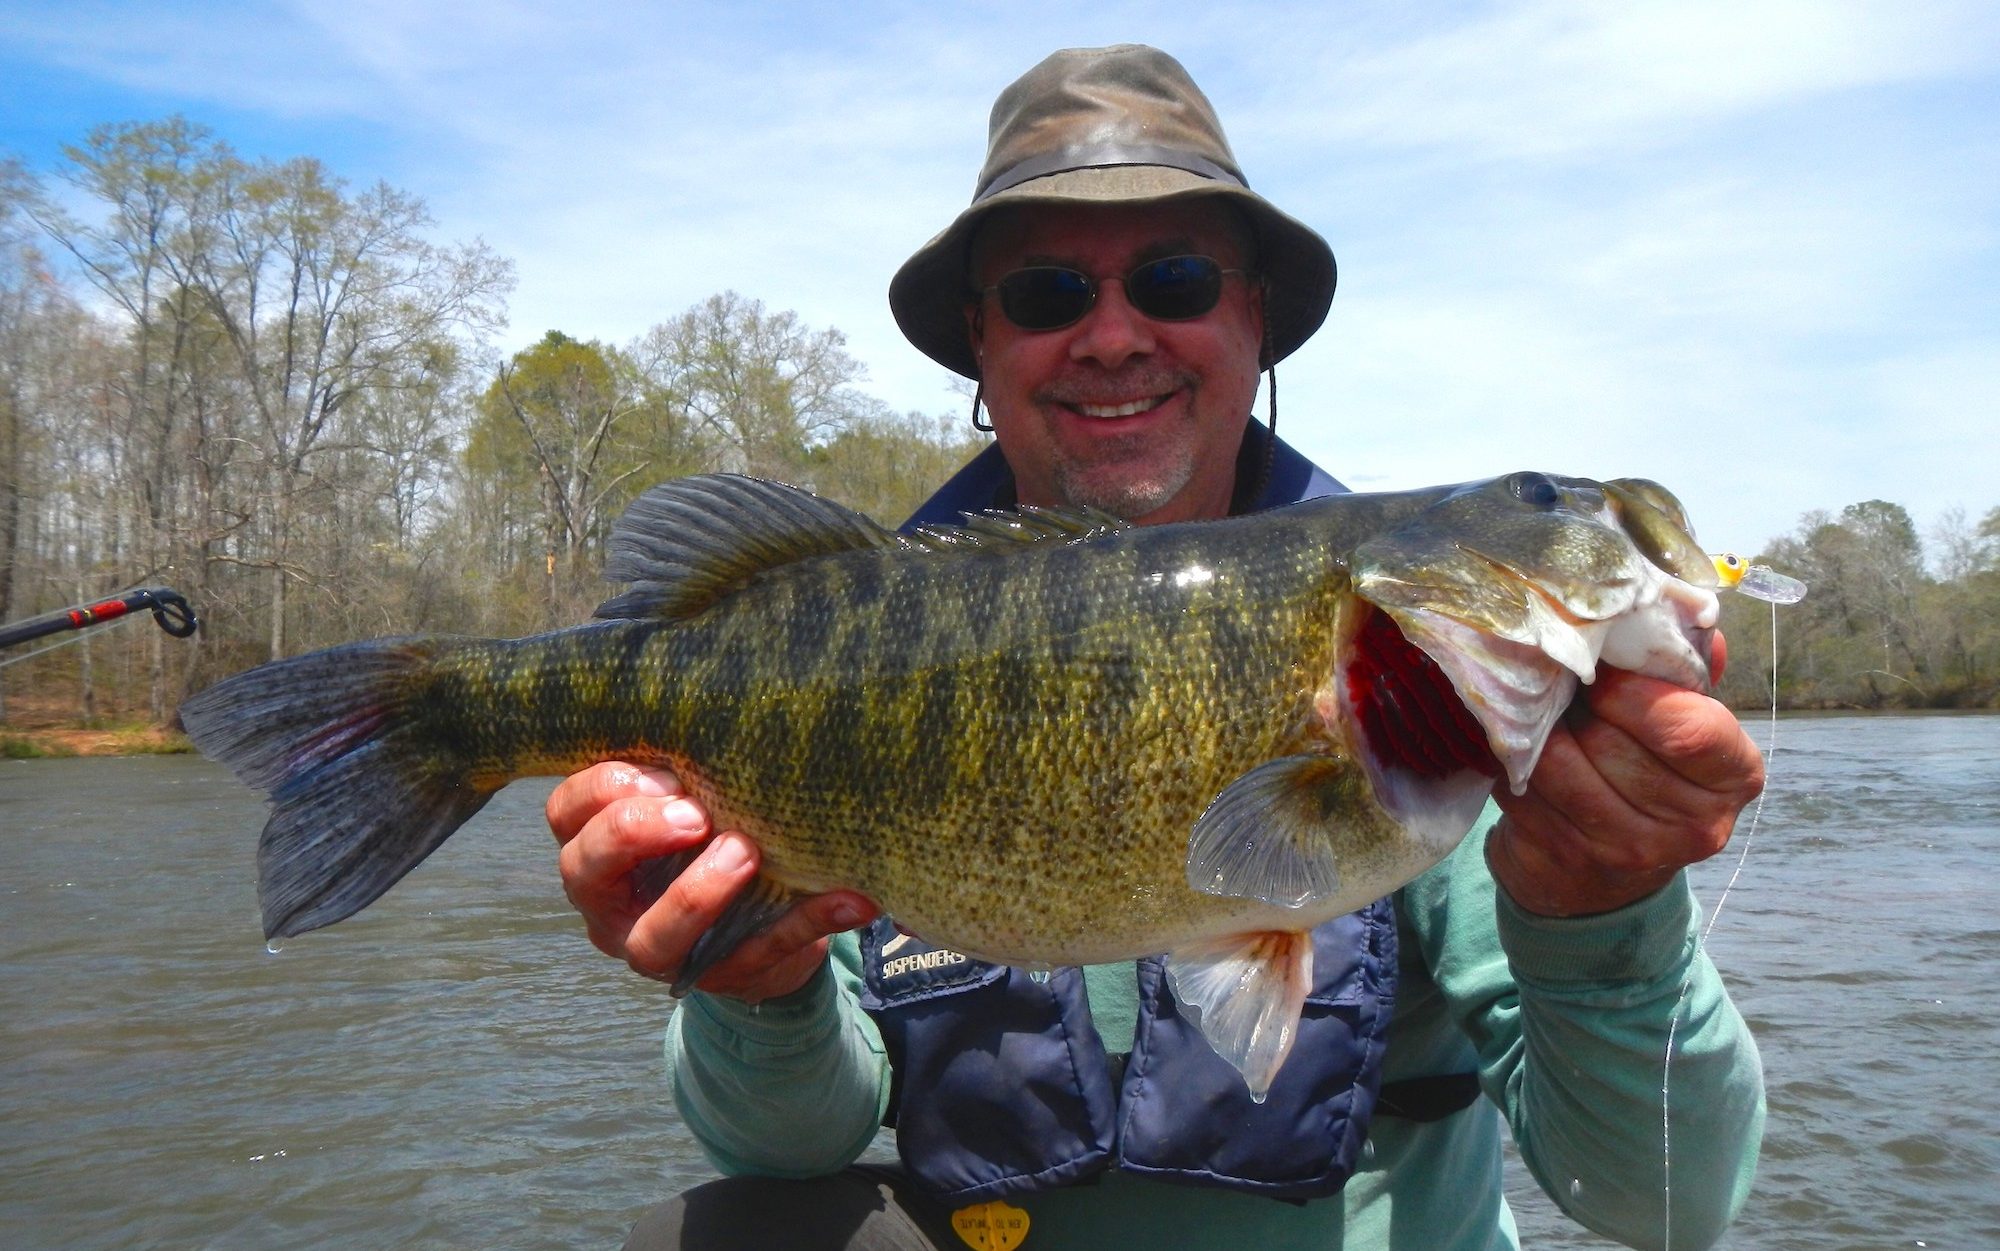 Hatchery scientists take on project to help U.S. largemouth bass